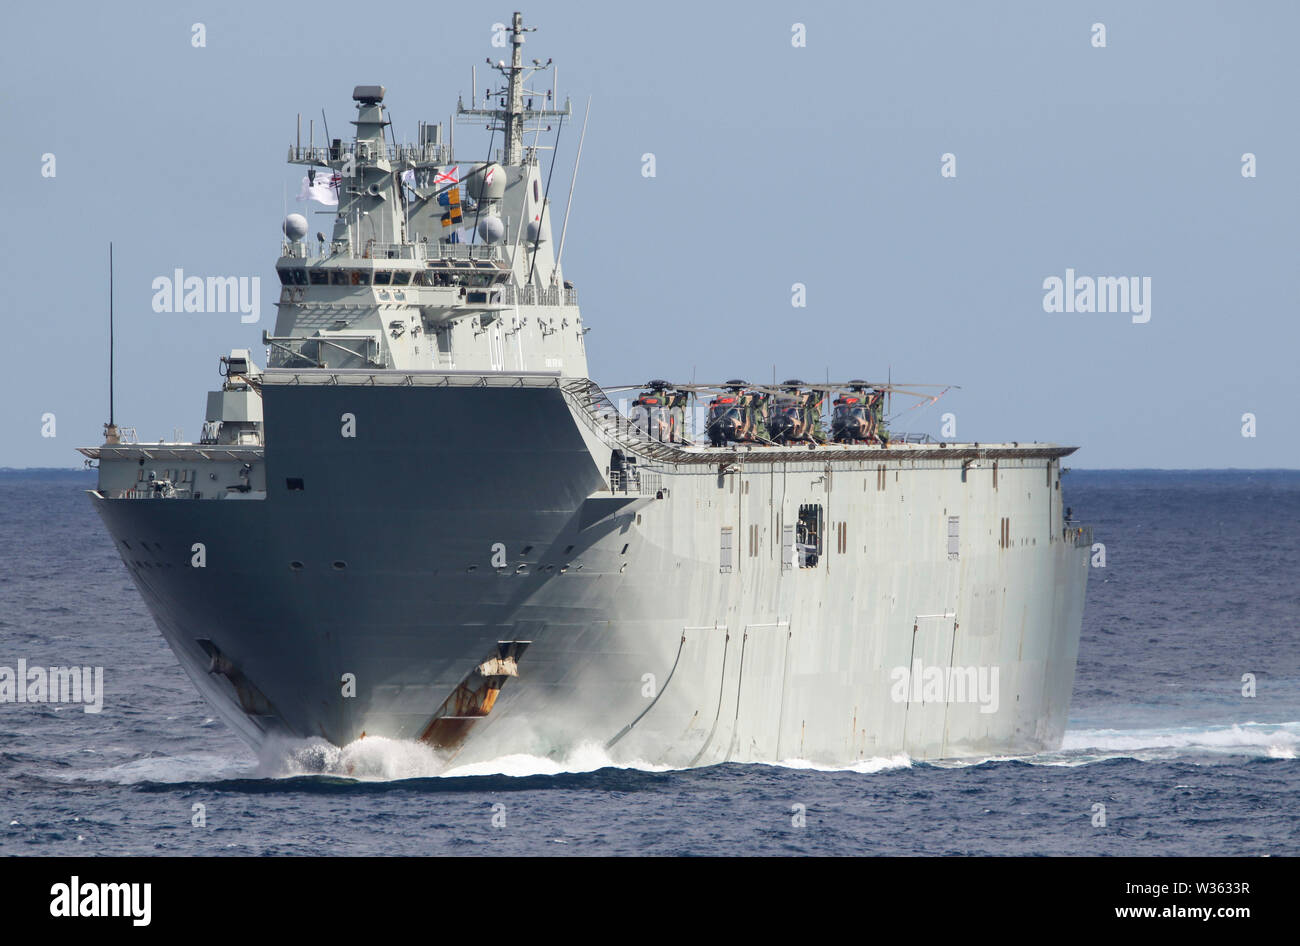 190711-N-DX072-1044 TASMAN SEA (July 11, 2019) The Royal Australian Navy Canberra-class landing helicopter dock ship HMAS Adelaide (L01) transits with the amphibious transport dock ship USS Green Bay (LPD 20) in a photo exercise (PHOTOEX) during Talisman Sabre 2019. Green Bay, part of the Wasp Expeditionary Strike Group, with embarked 31st Marine Expeditionary Unit, is currently participating in Talisman Sabre 2019 off the coast of Northern Australia. A bilateral, biennial event, Talisman Sabre is designed to improve U.S. and Australian combat training, readiness and interoperability through r Stock Photo